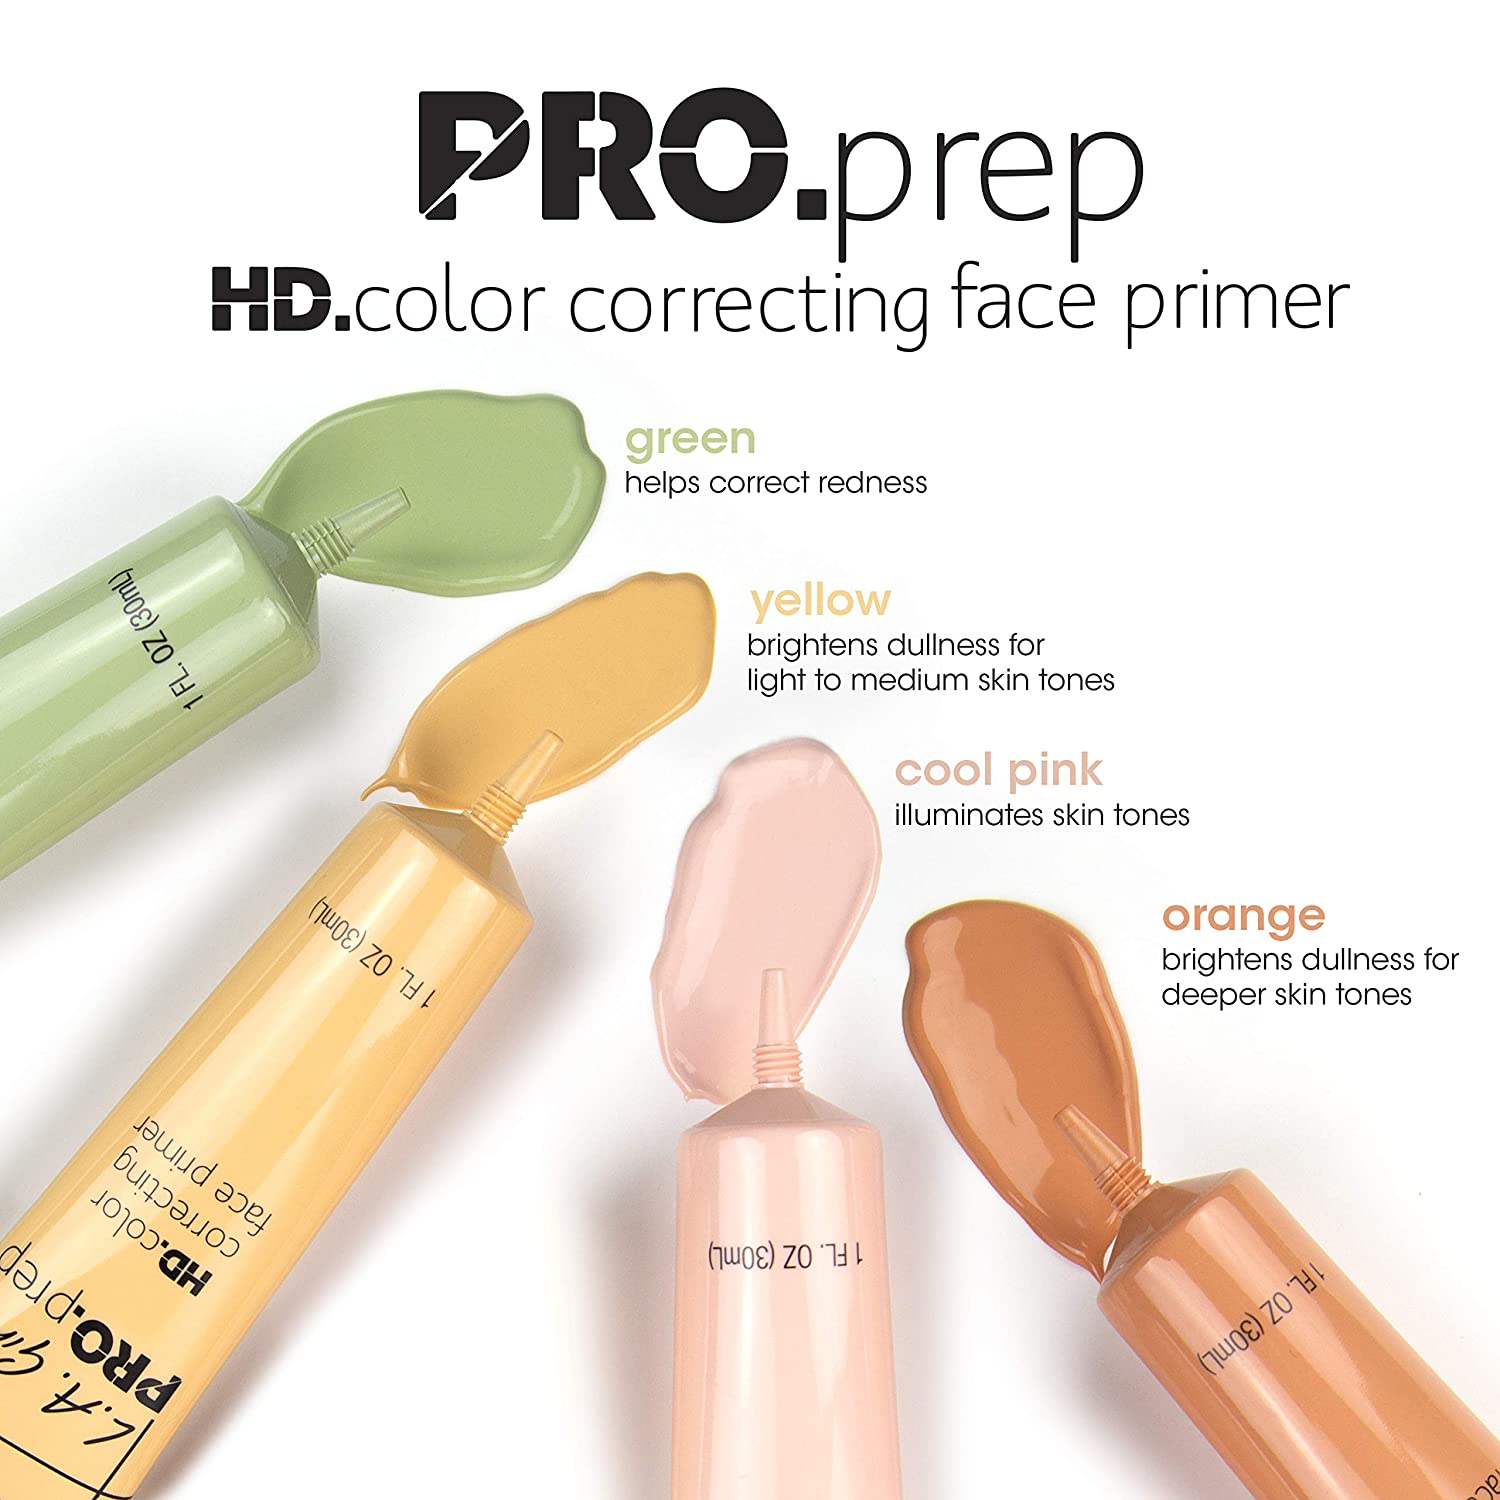 L.A. Girl Pro.prep HD.Colour Correcting Face Primer - Give Us Beauty